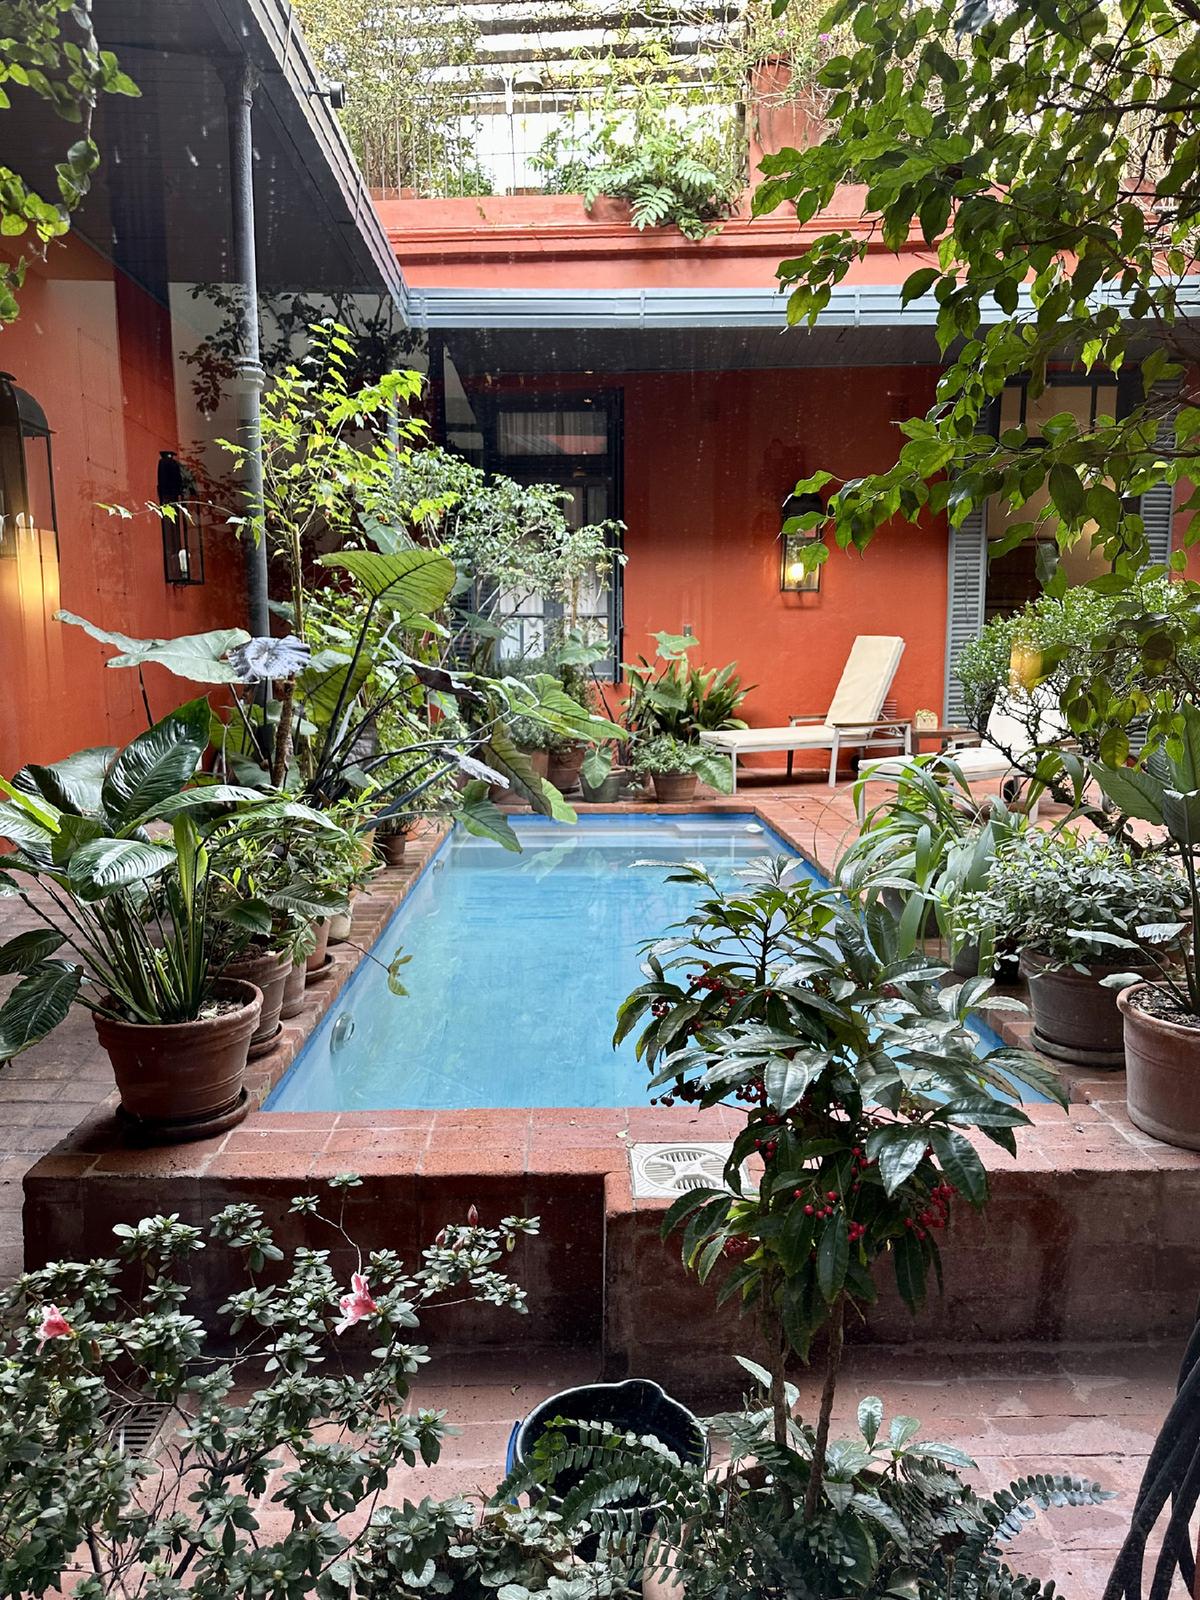 The Be Jardin Escondido, owned by Francis Ford Coppola, is a quiet and luxurious place to stay in Buenos Aires, Argentina. (Photo courtesy of Margot Black)